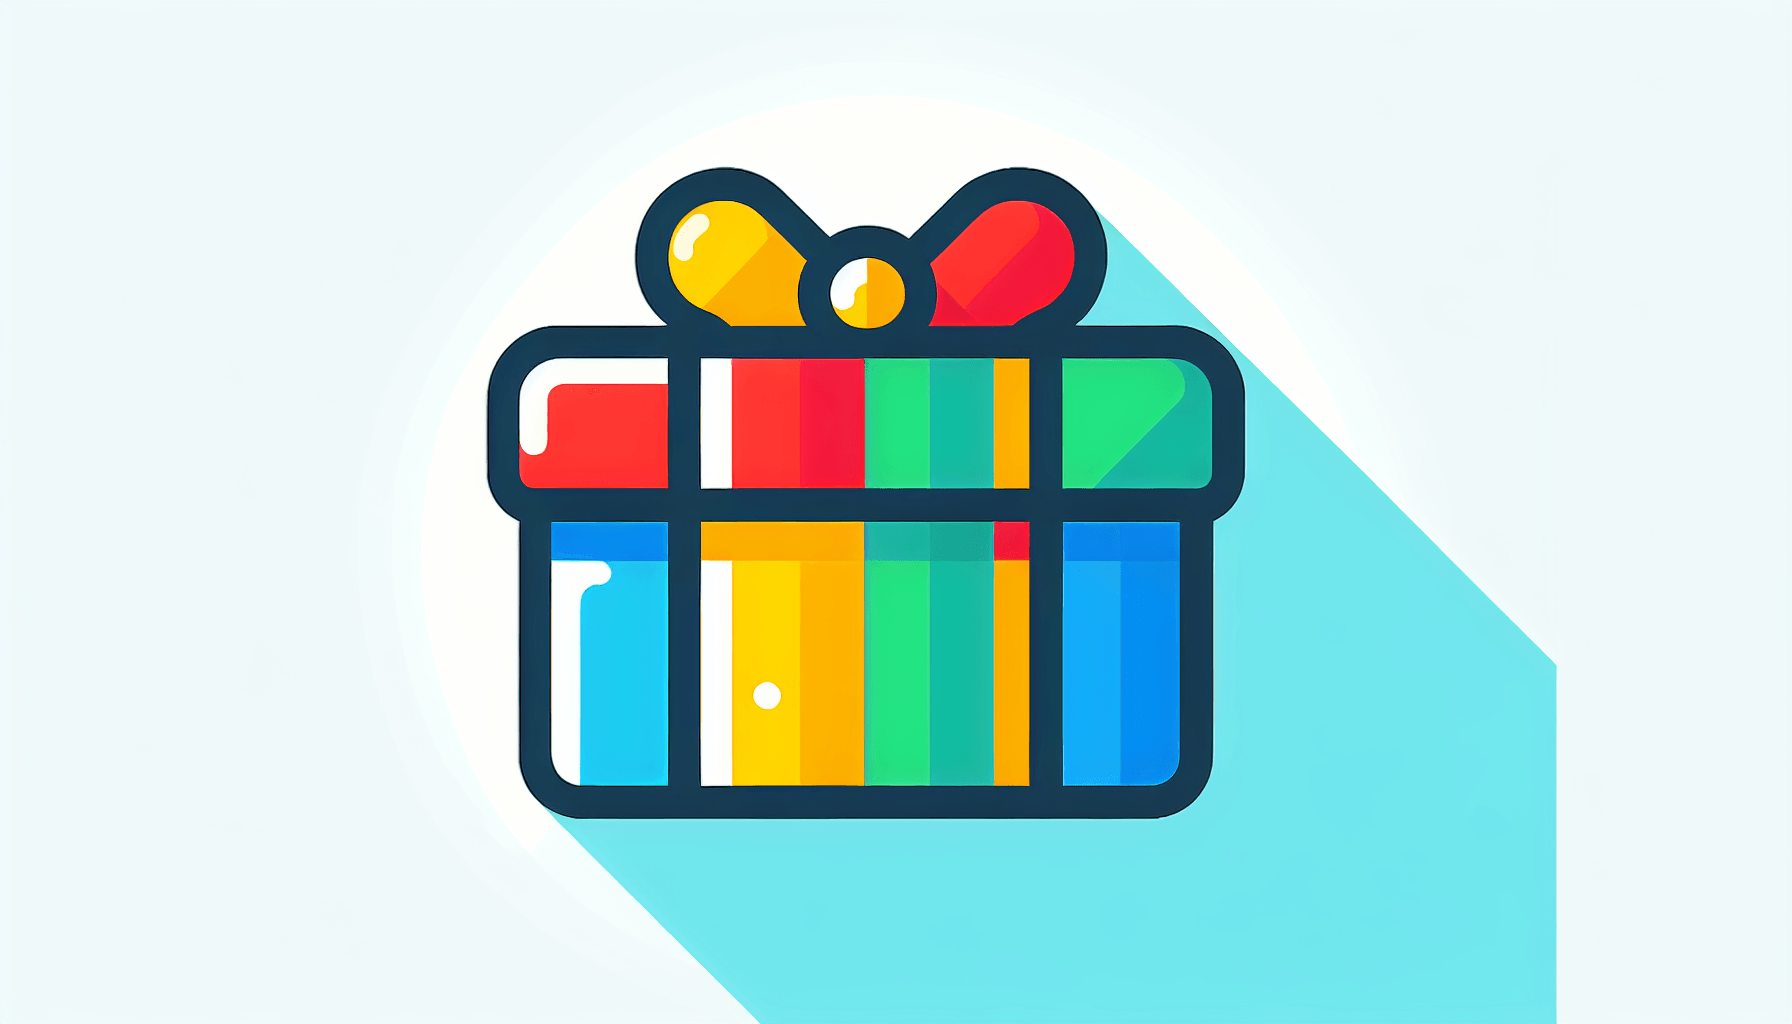 Gift box in flat illustration style and white background, red #f47574, green #88c7a8, yellow #fcc44b, and blue #645bc8 colors.